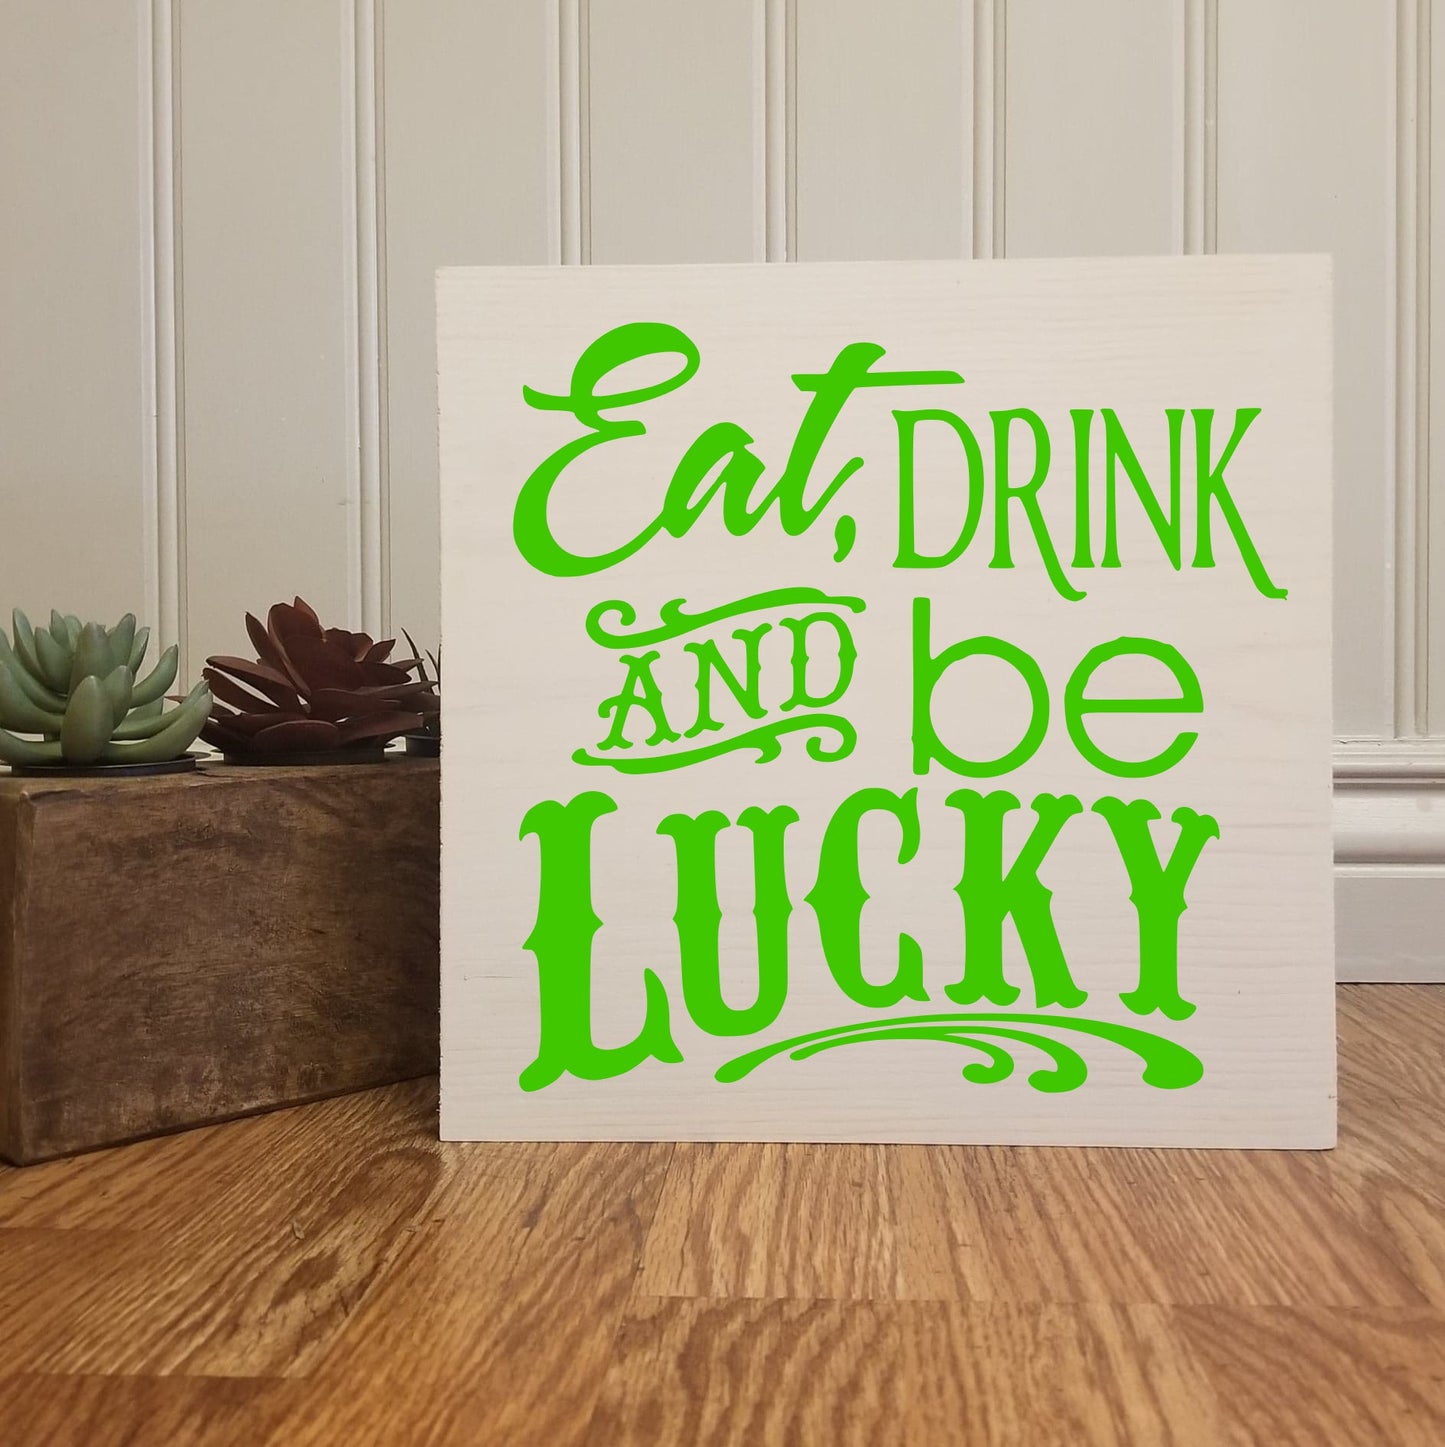 Eat, drink and be lucky: Square Design A1617N